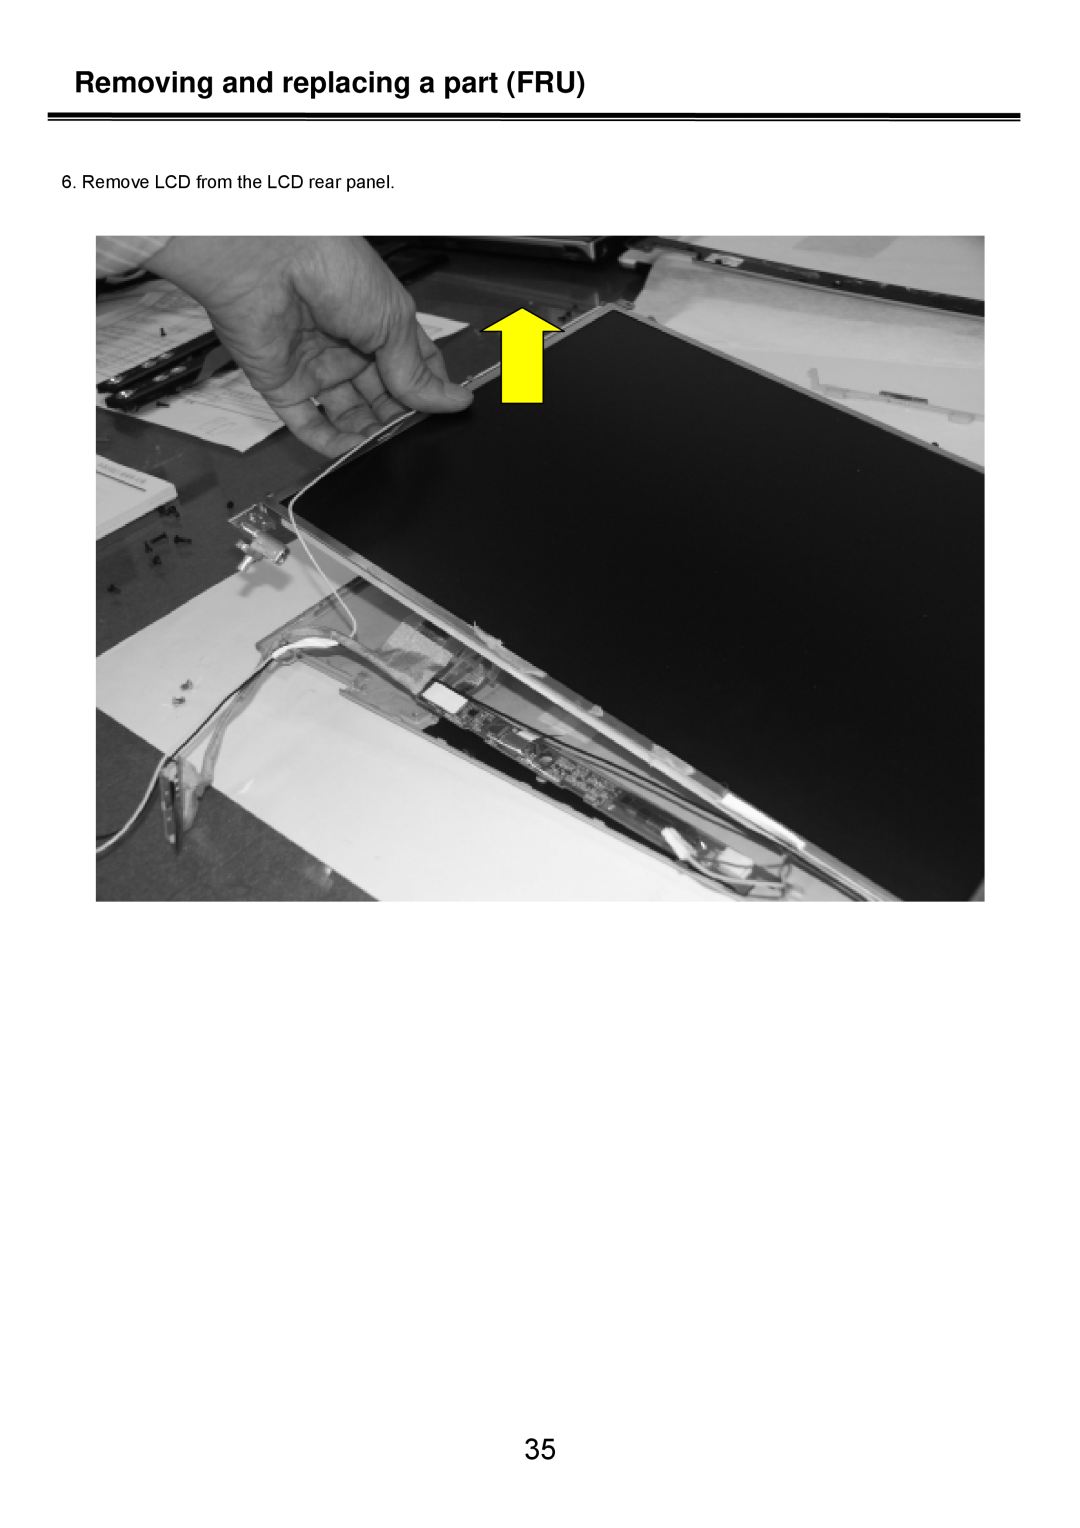 LG Electronics LS50 service manual Remove LCD from the LCD rear panel, Removing and replacing a part FRU 